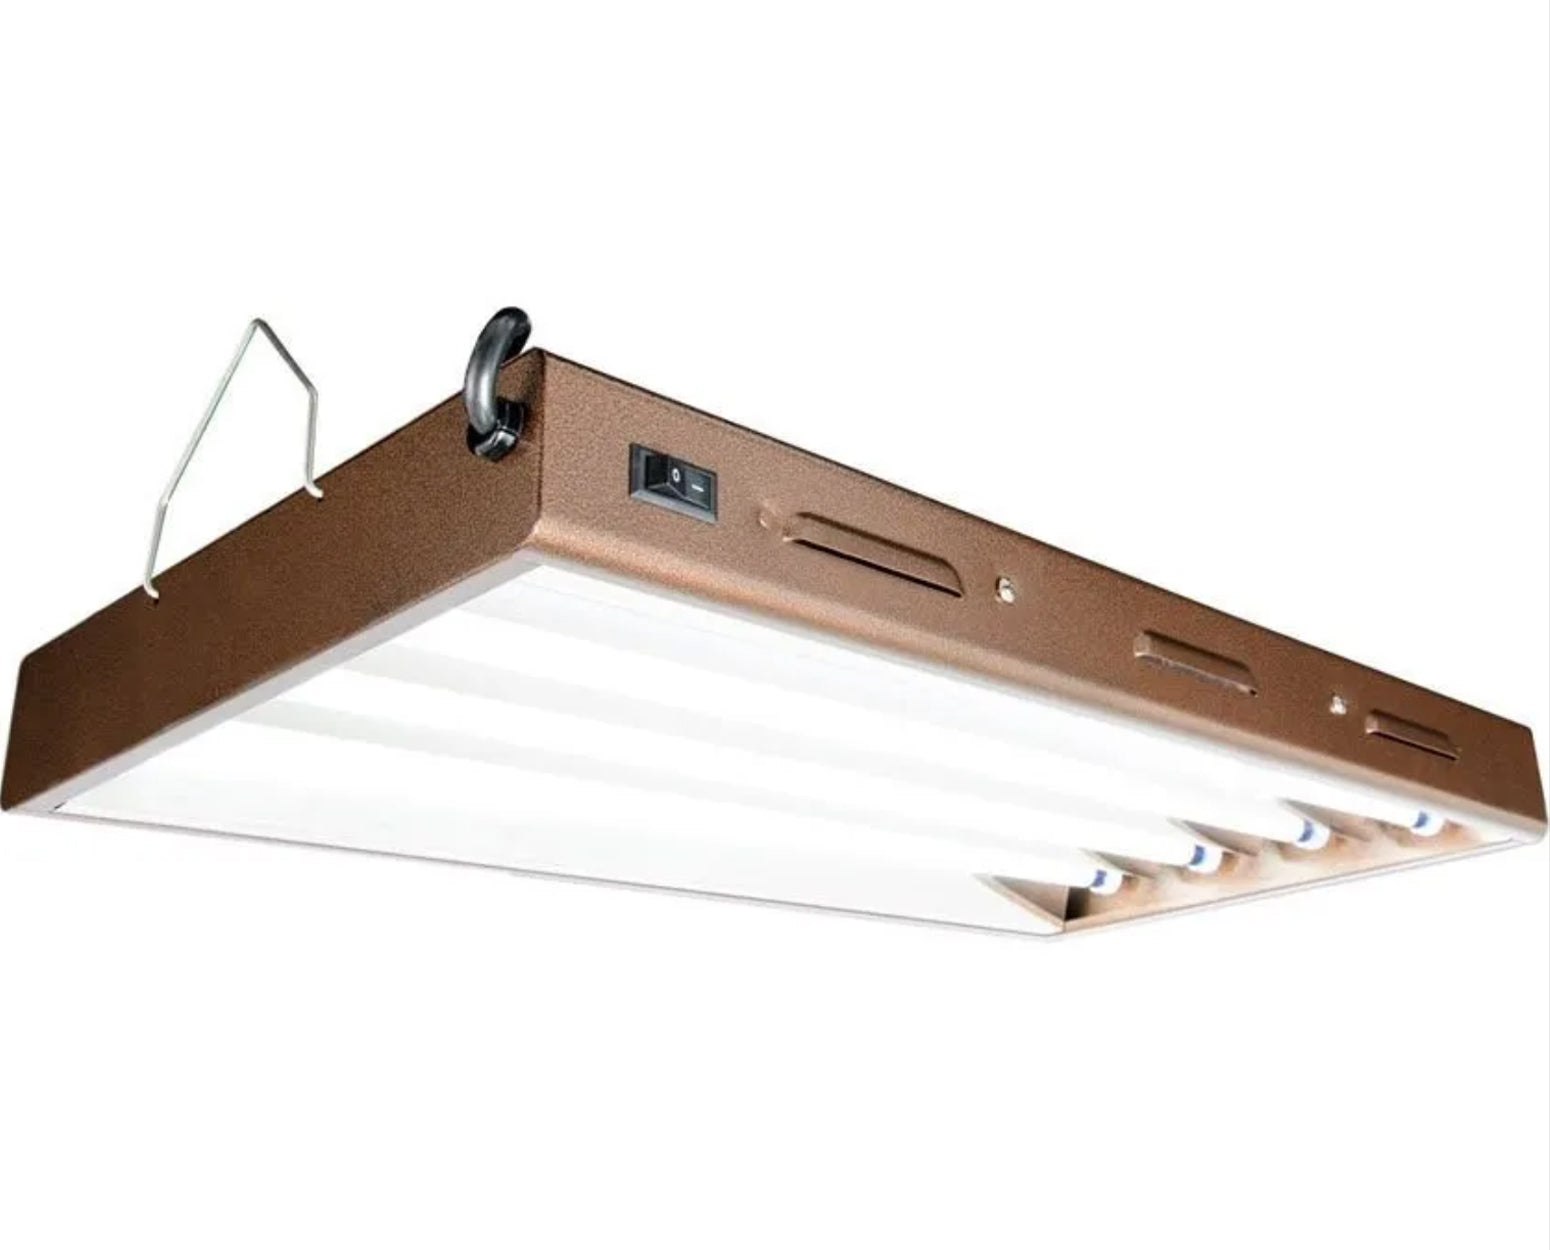 A high lumen output T5 Designer 4 Tube Light System with Bulbs, 4ft, hanging on a white background.